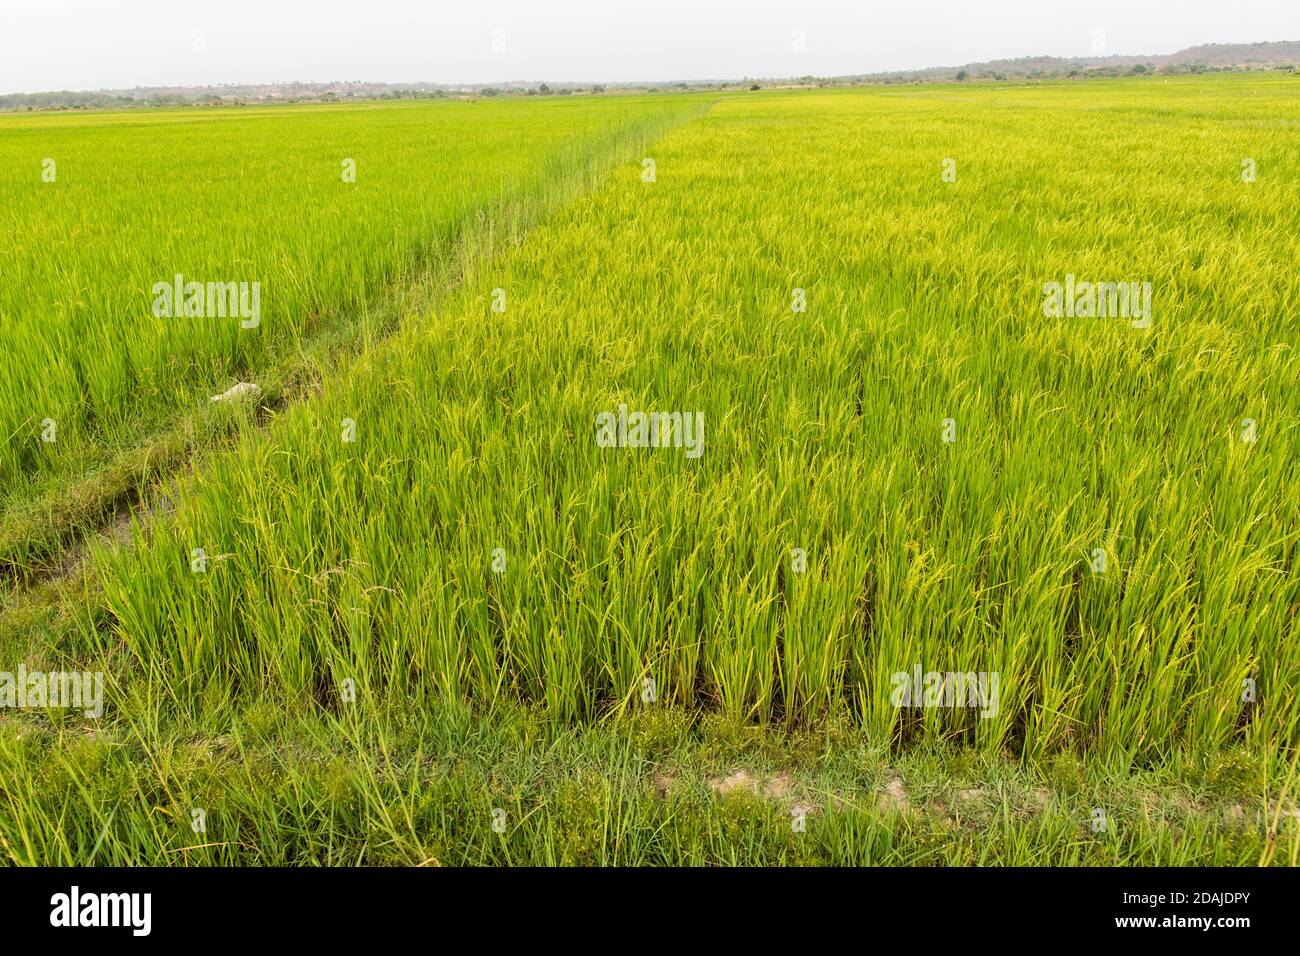 Selingue, Mali, 26th April 2015; Irrigated rice ripening. Normally one hectare of rice requires 4 sacks of NPK and 4 sacks of Uree fertilizer. This costs 100,000 CFA per hectare.  From Selingue the farmer can usually get 5 to 6 tons of rice per hectare. 10 sacks for one ton of rice and maize each can sell for 12,500 per sack, so 120,000 CFA per ton or for 5 tons total value is 600,000 CFA per hectare for the rice. Farmers also pay water charges of 35,000 CFA per season. Stock Photo